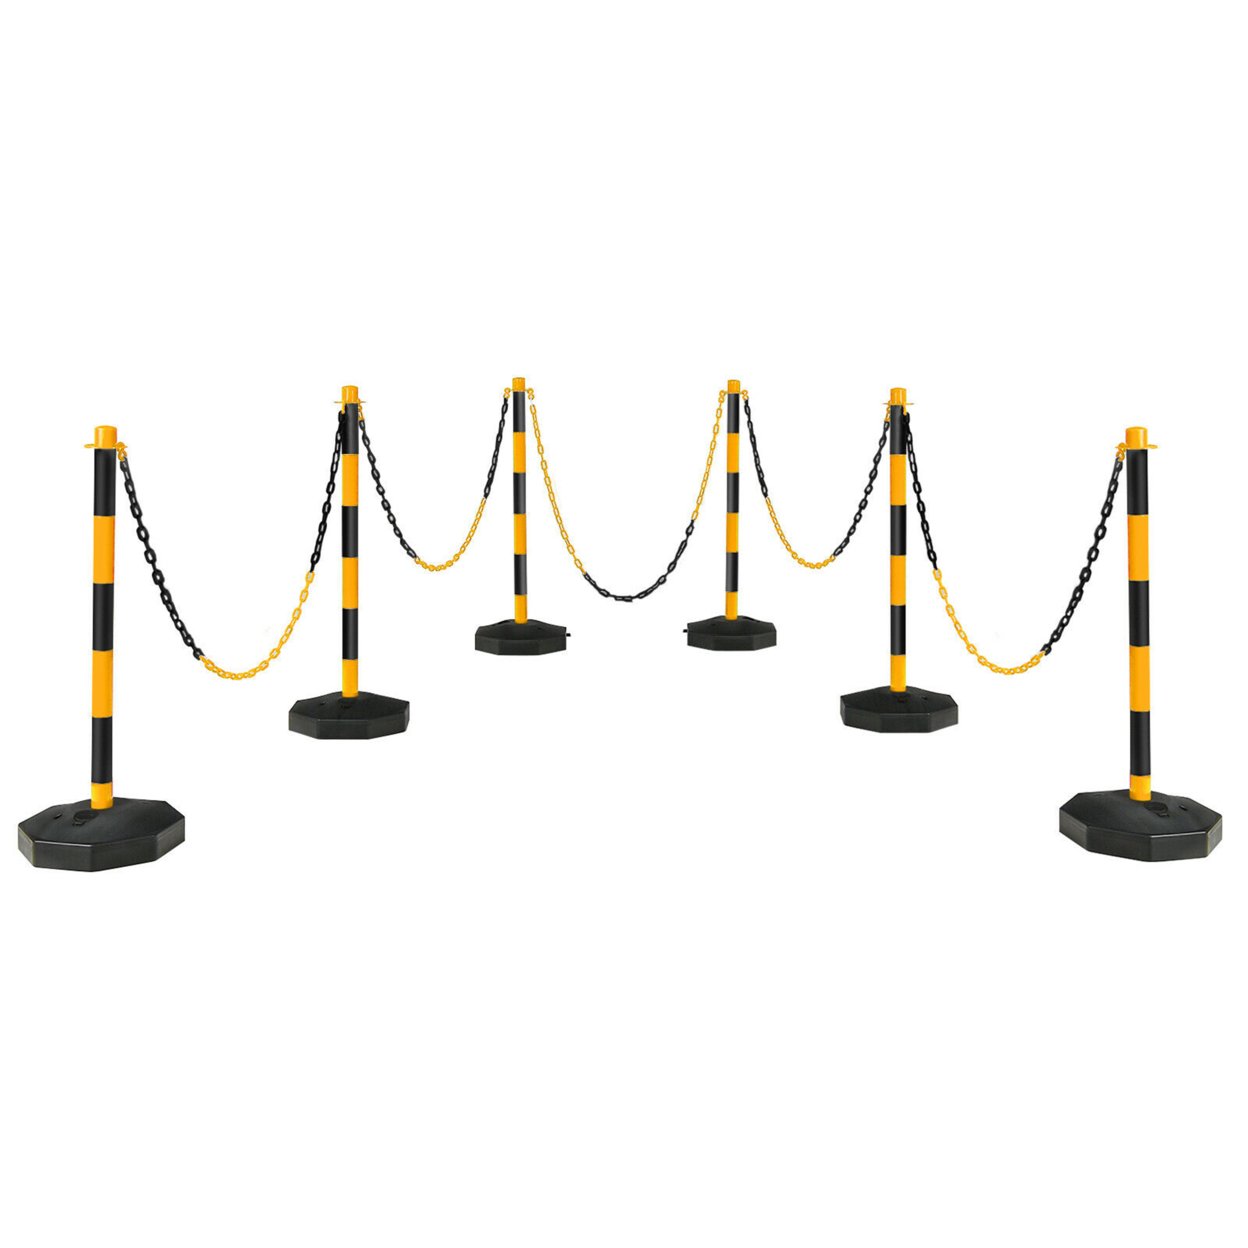 6PCS Traffic Delineator Pole Safety Caution Barrier W/ 5ft Link Chains - Yellow & Black